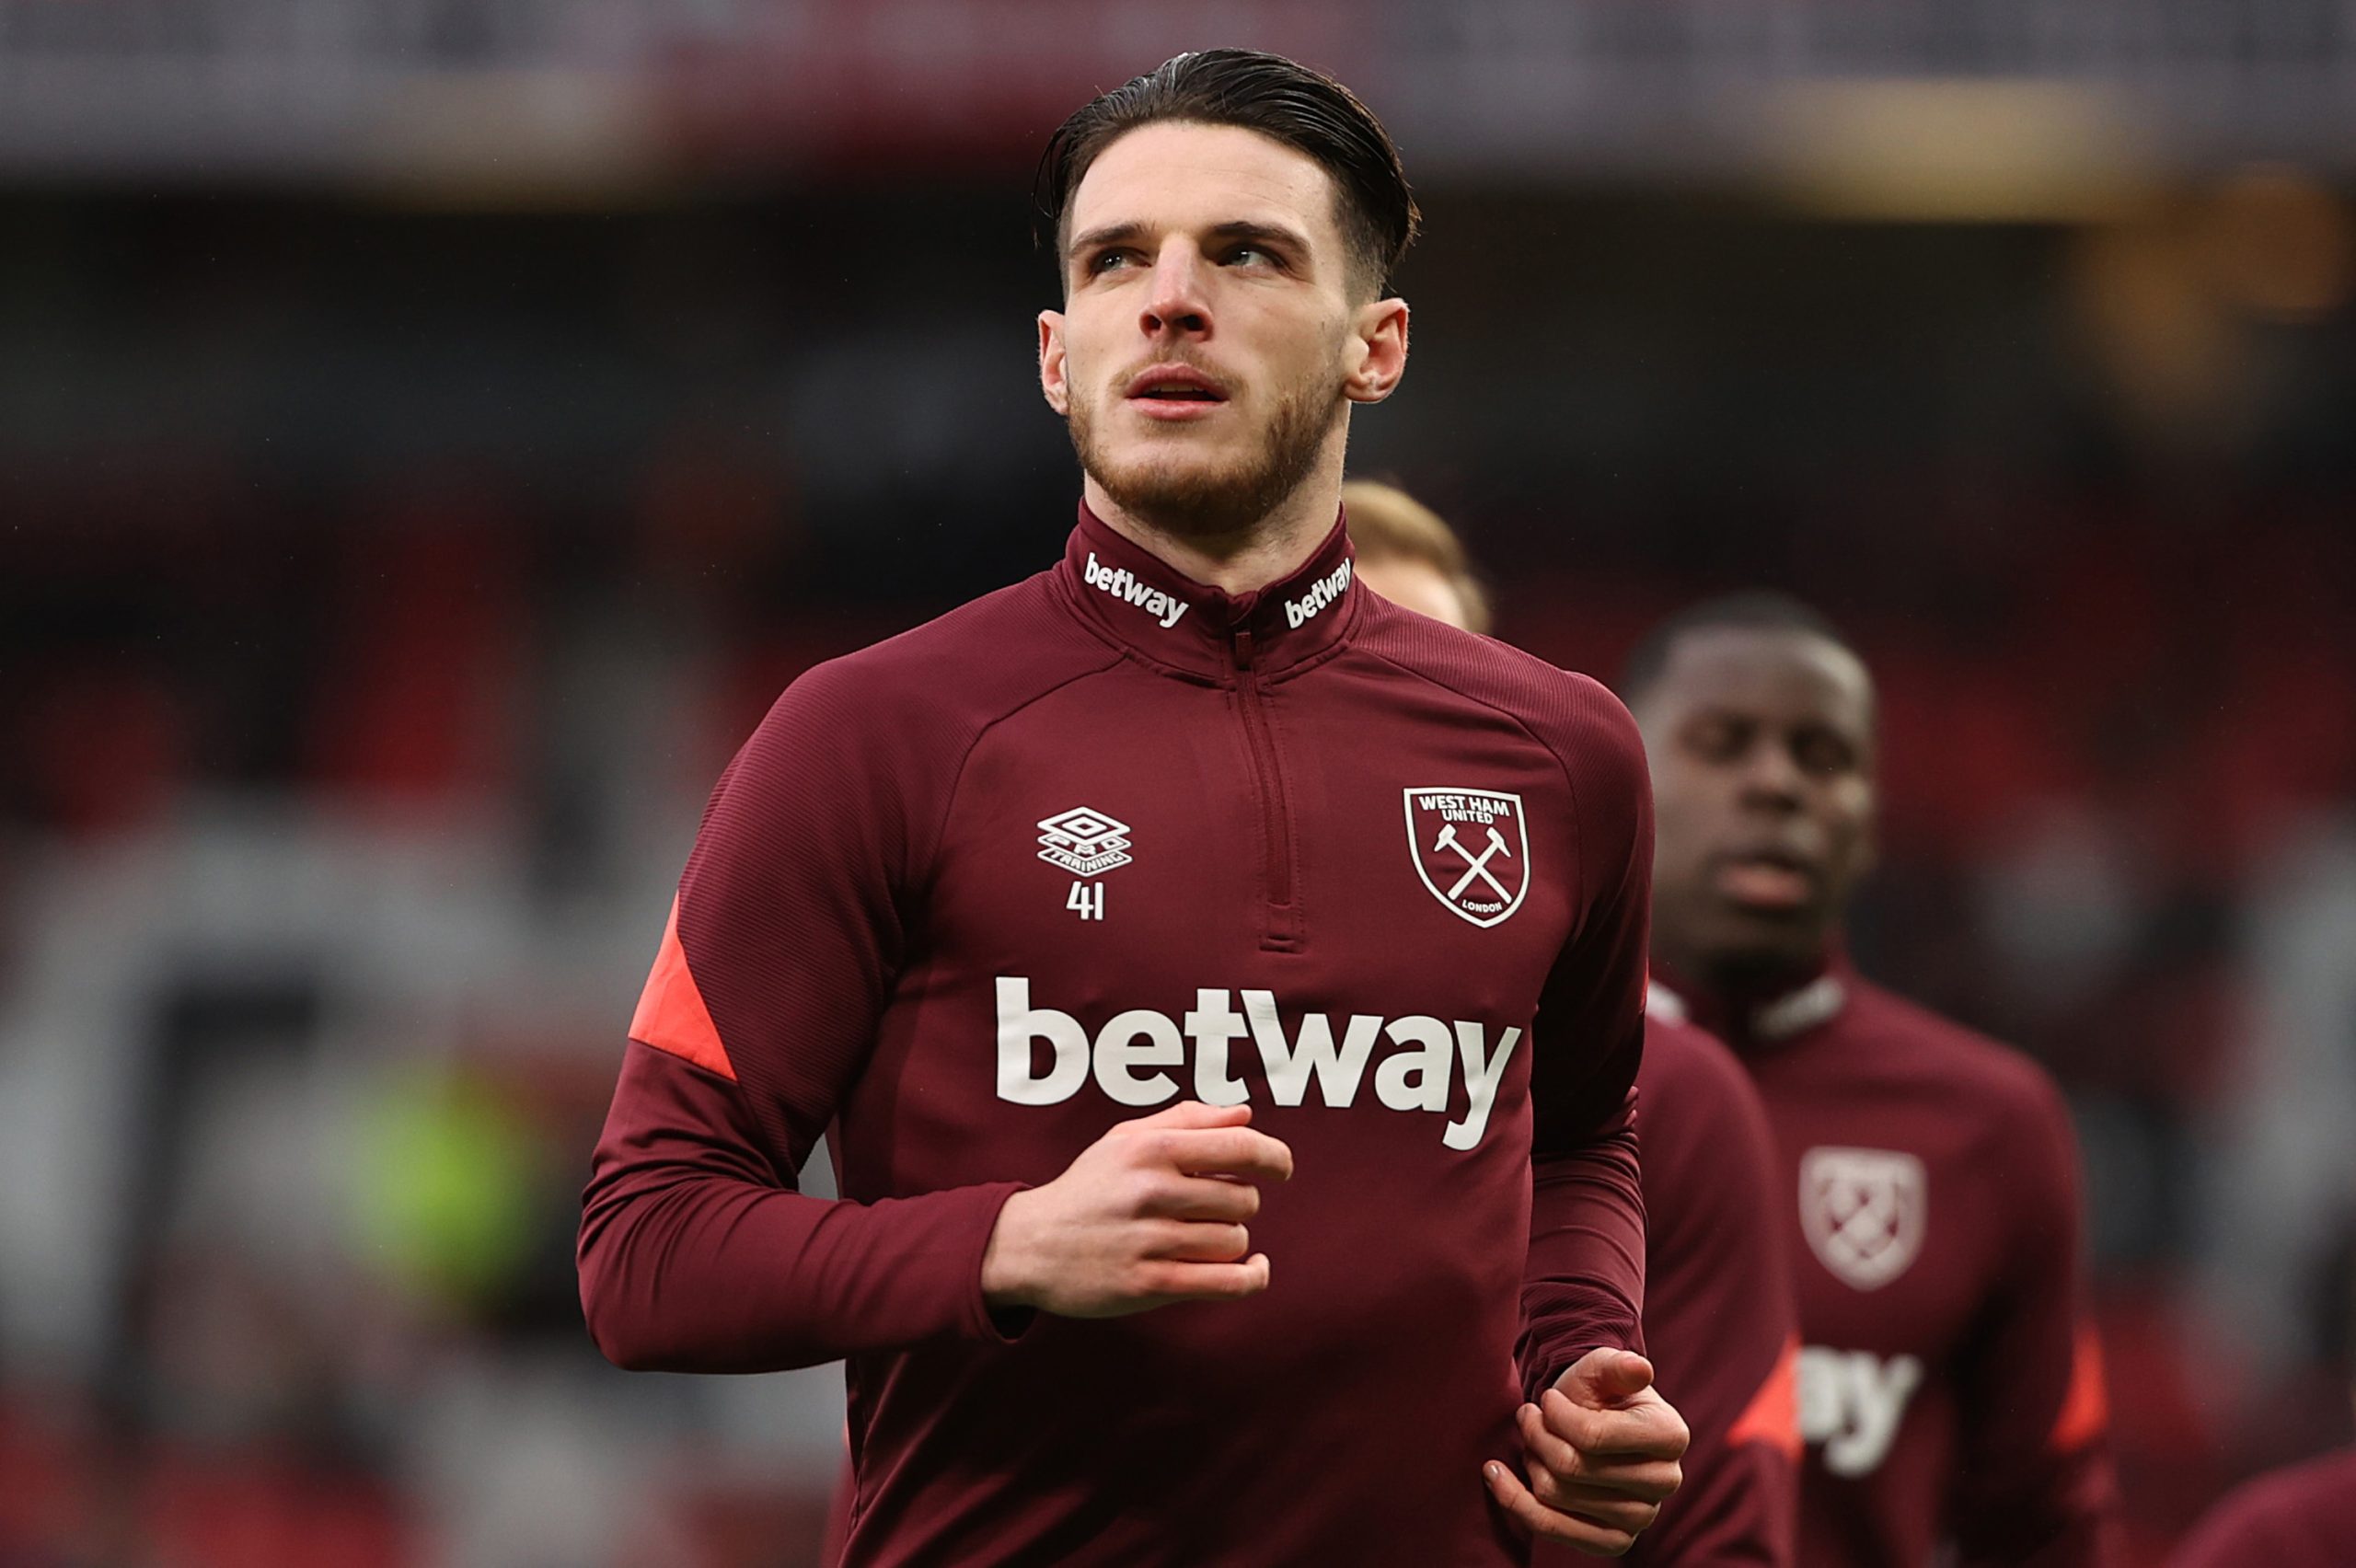 Di Marzio claims that Chelsea could beat Arsenal in the race to sign Declan Rice.